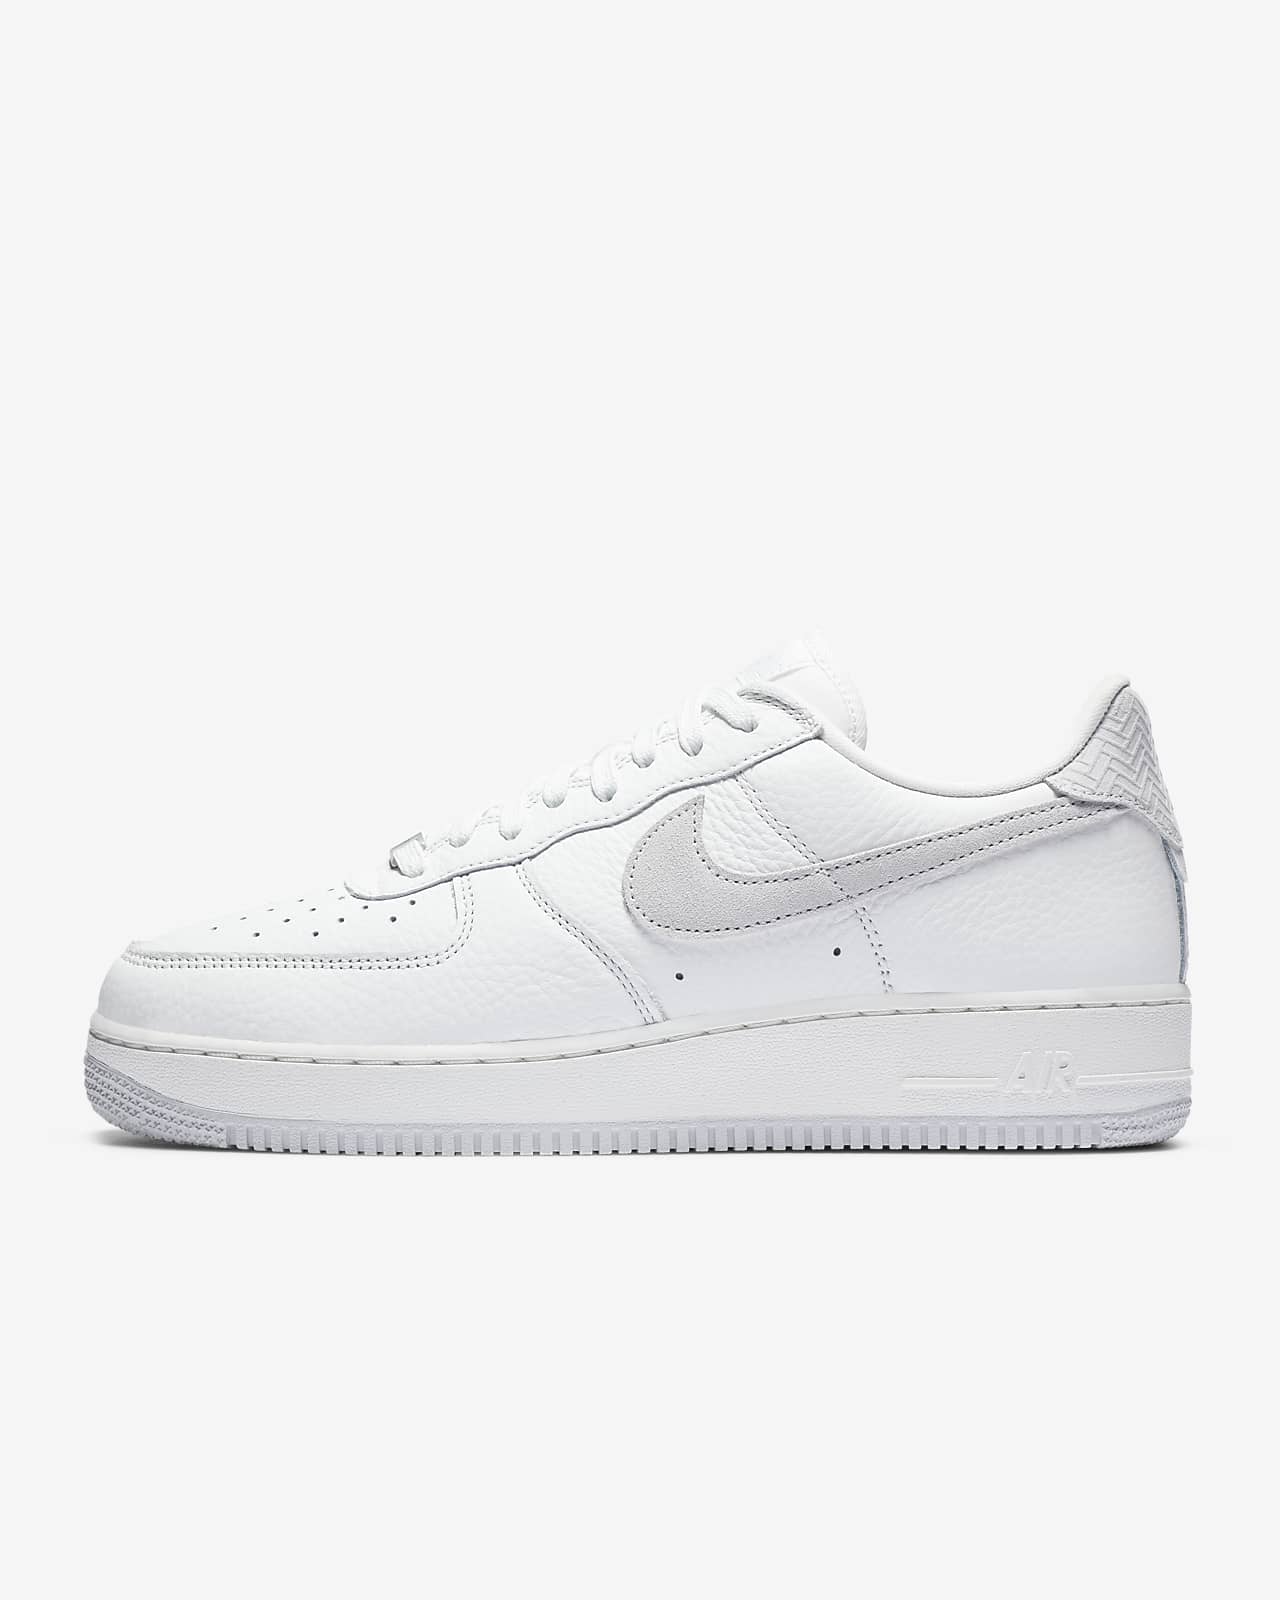 nike air force hombre 1 07